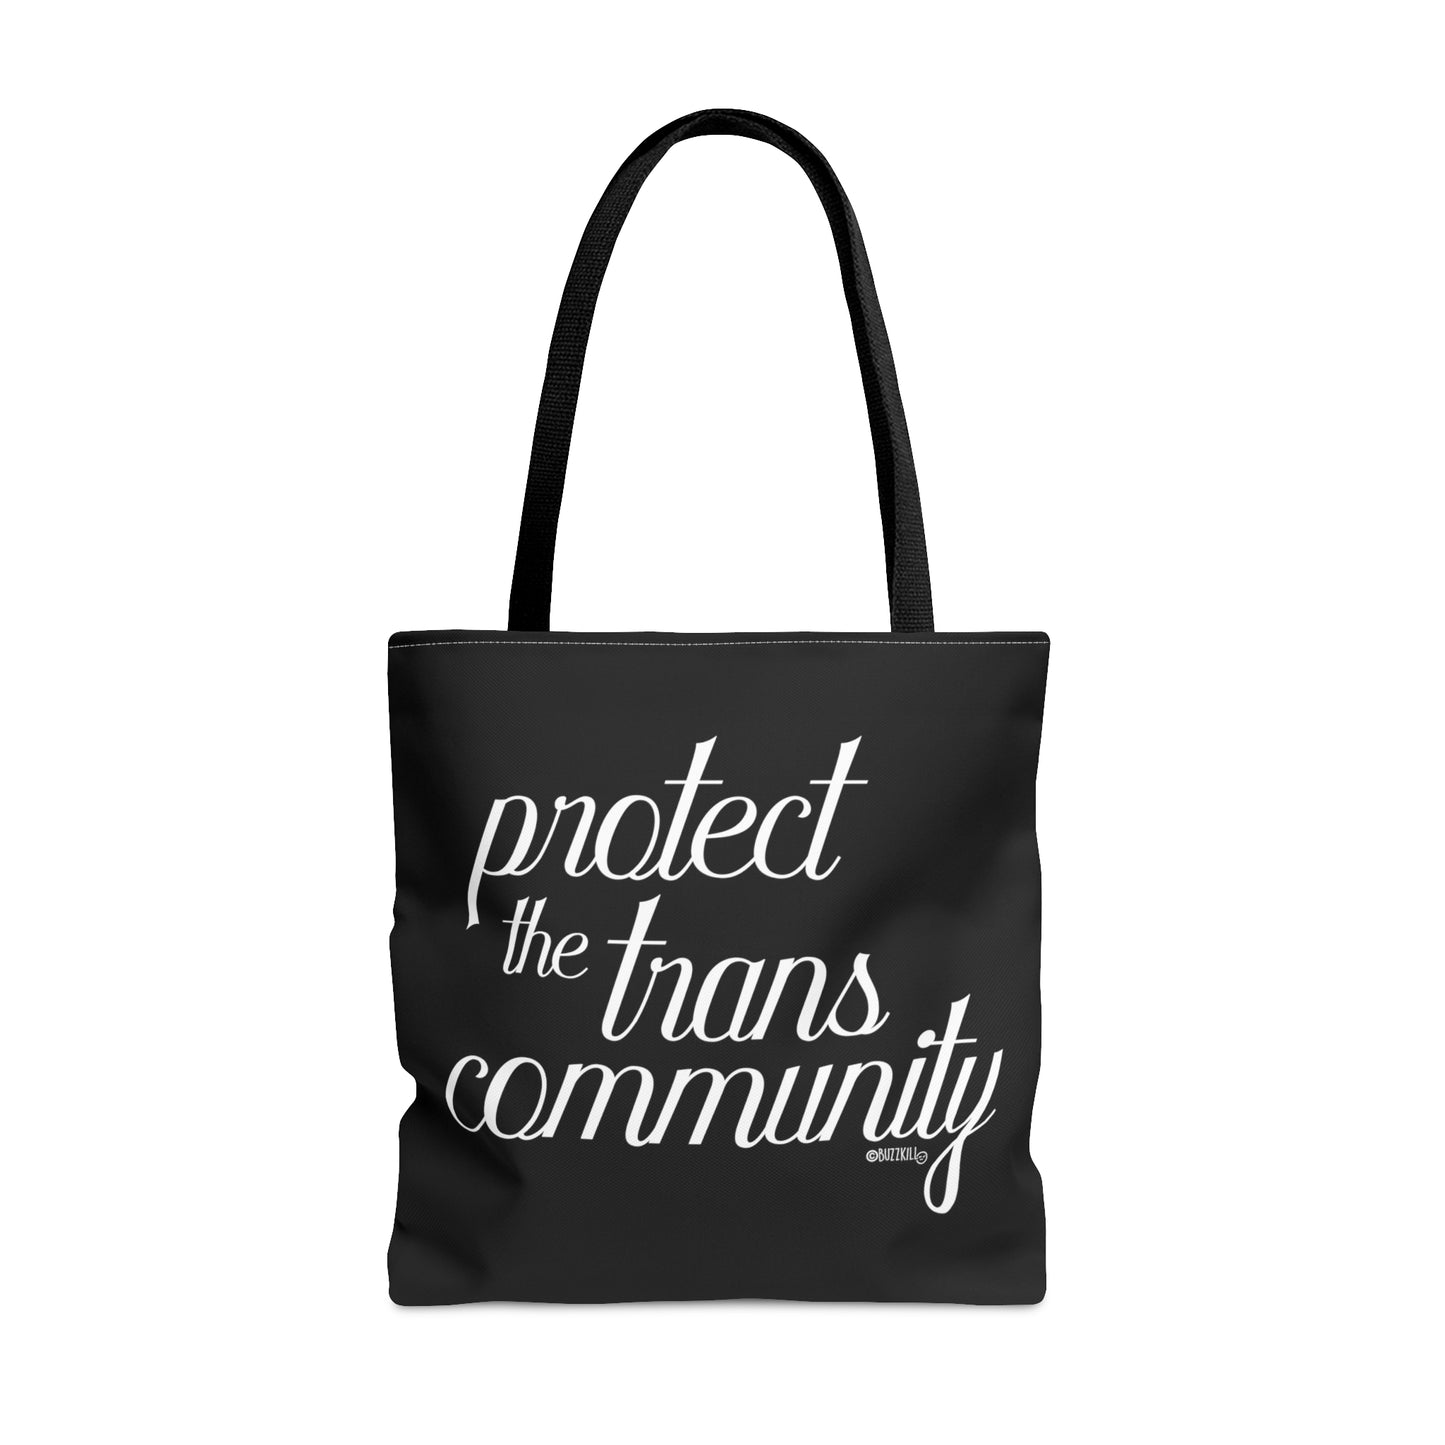 Protect The Trans Community - Tote Bag